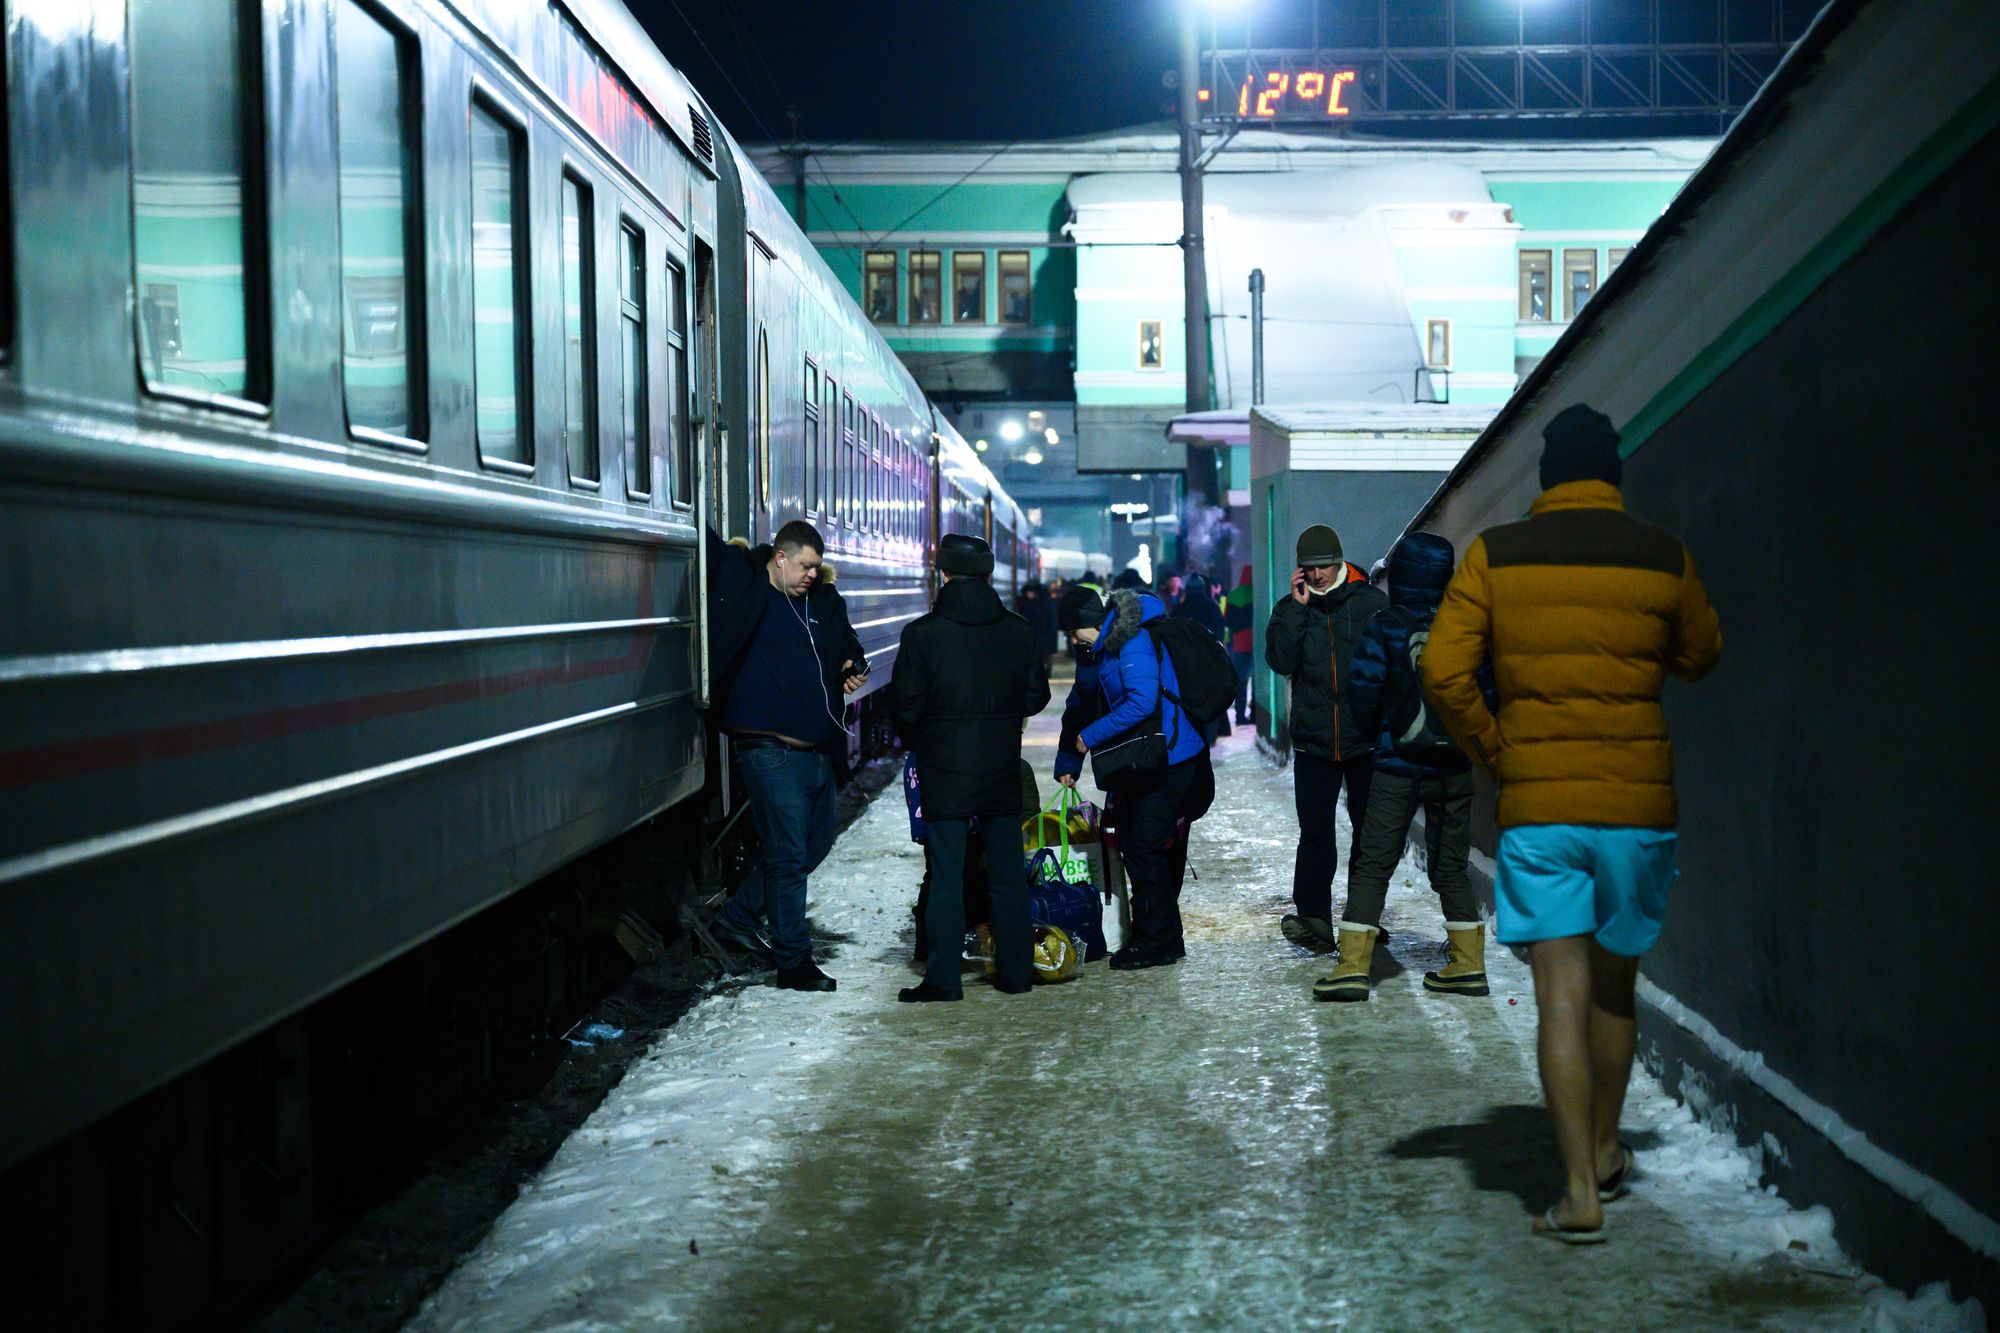 Russia to Mongolia by train, Part 1.